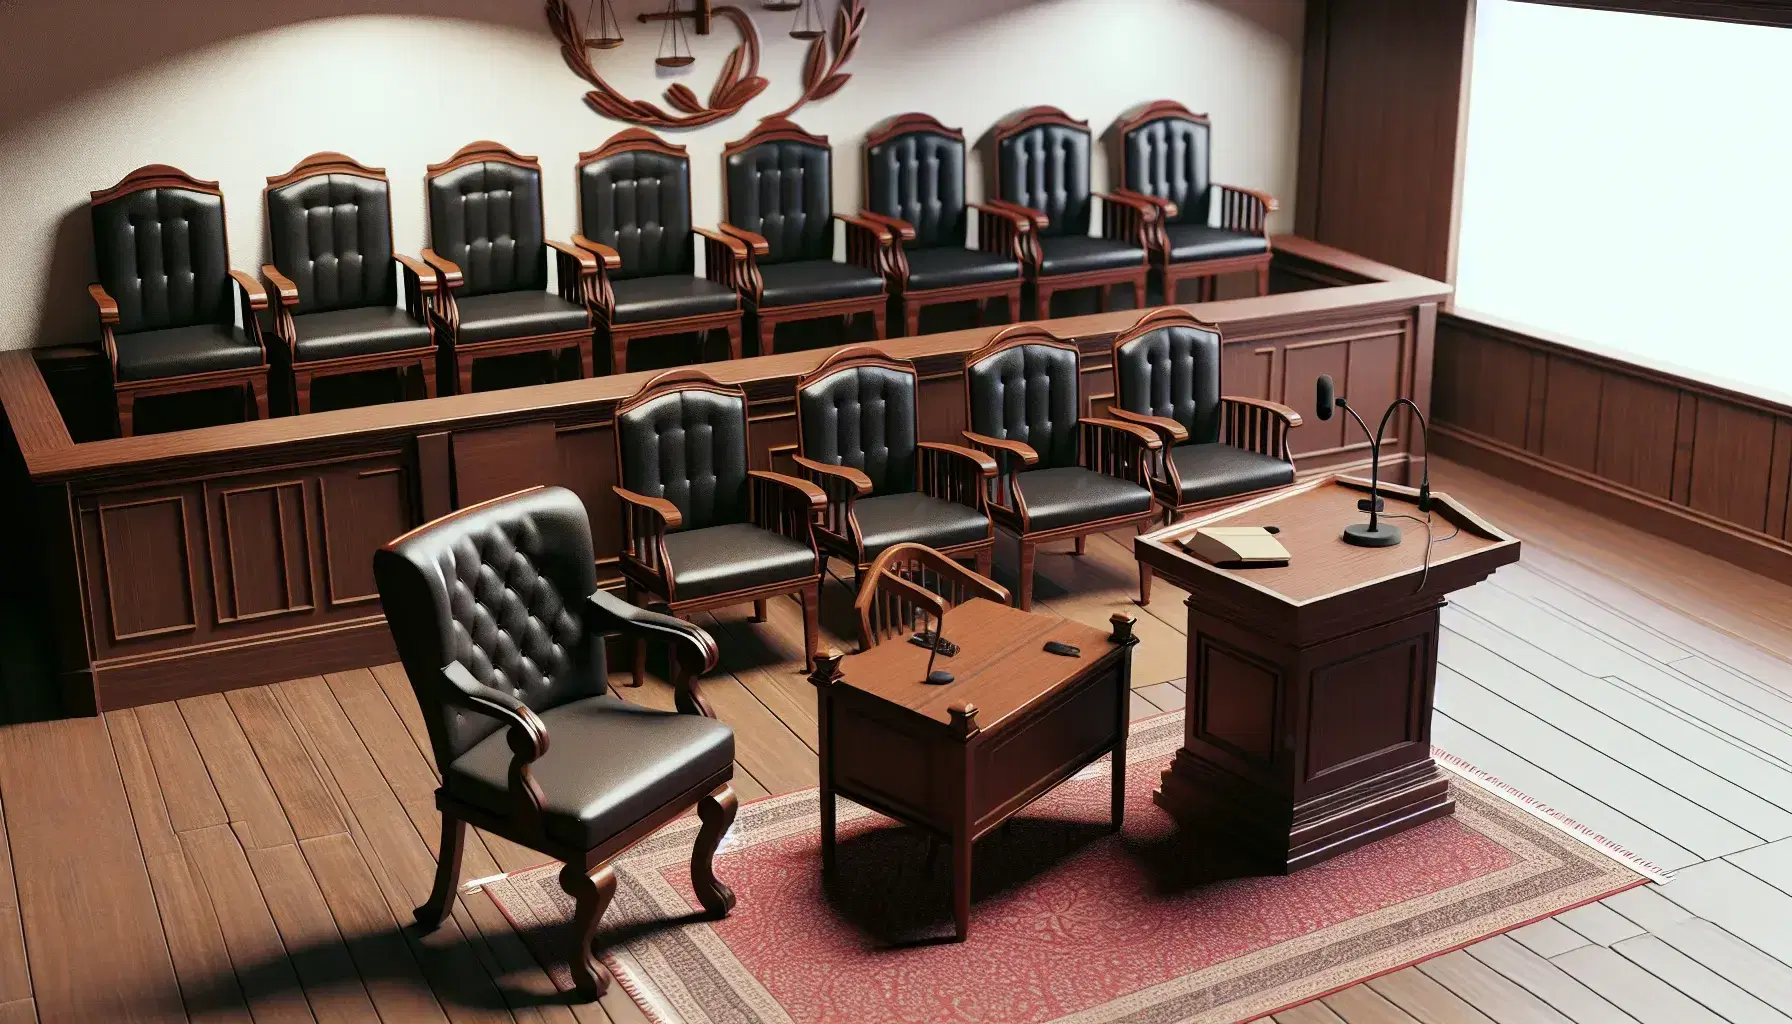 Courtroom interior with witness stand, judge's bench, jury box with twelve chairs, two lawyers' tables, and a large wooden door.